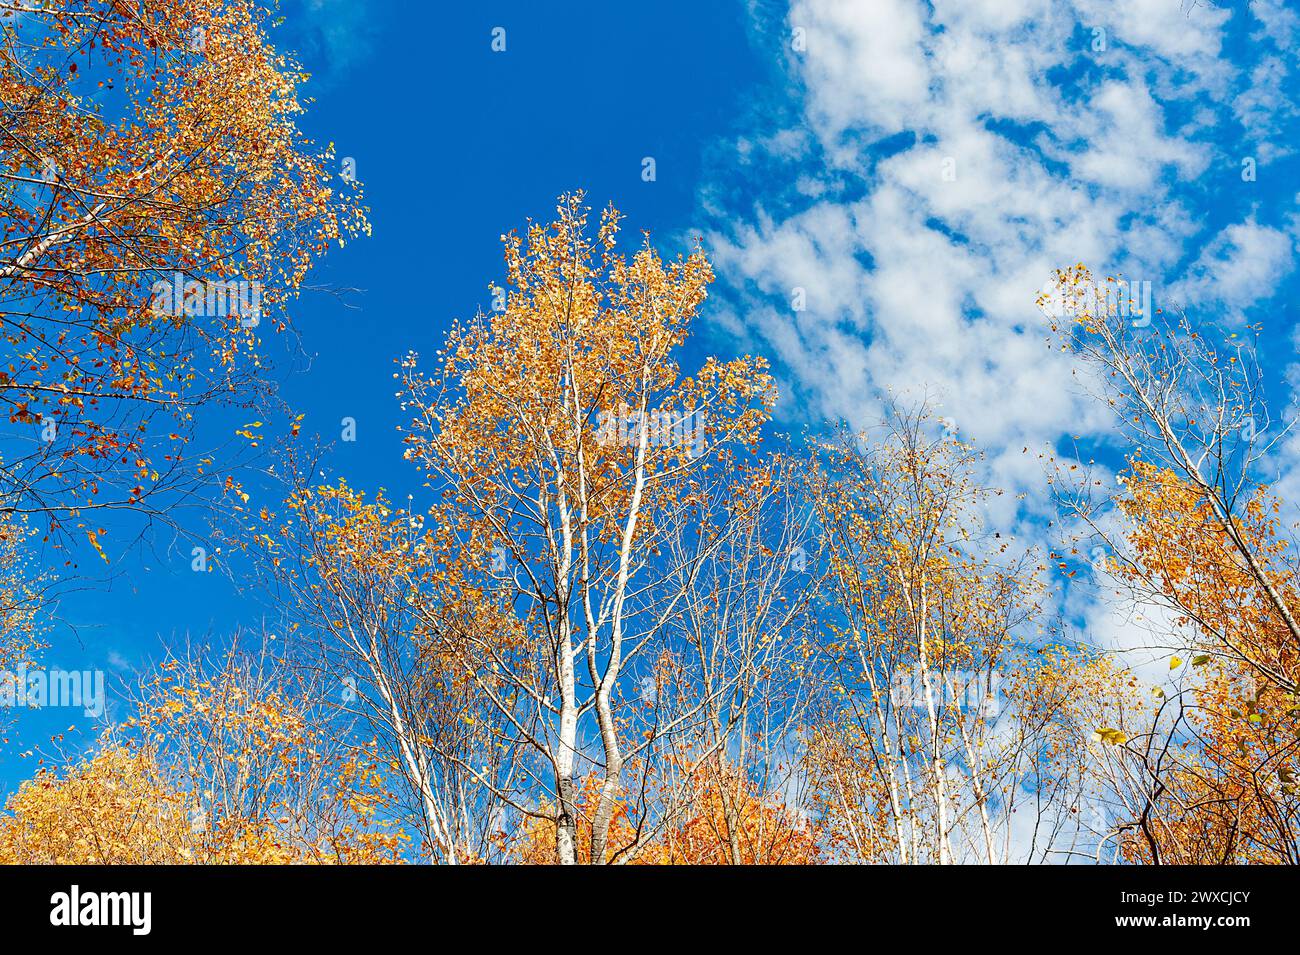 Looking up to yellow leaves on birch tree contrasting with blue sky Stock Photo